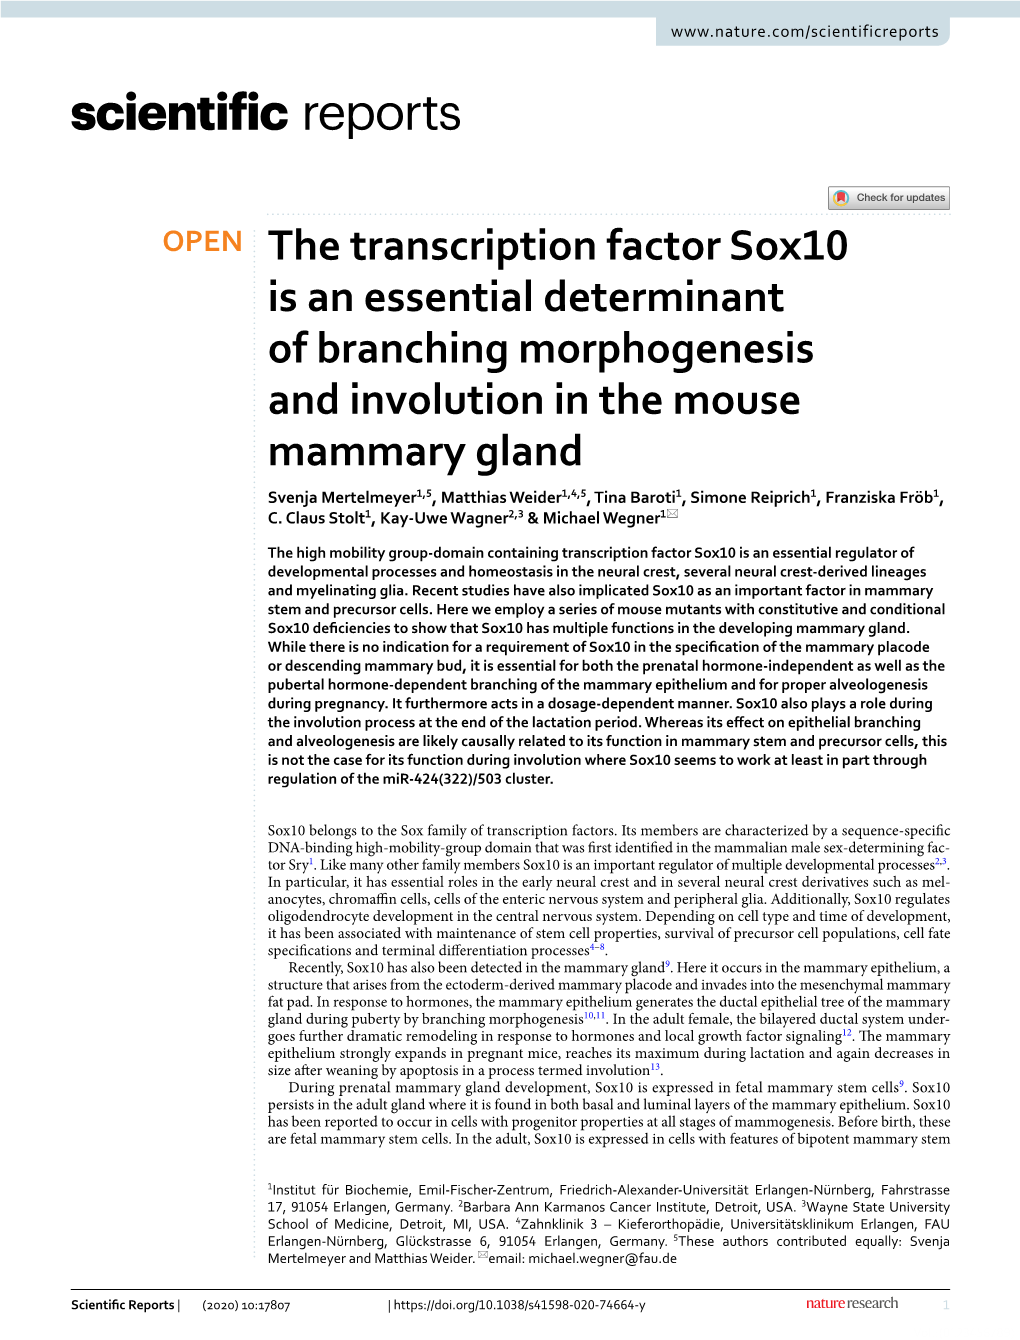 The Transcription Factor Sox10 Is an Essential Determinant of Branching